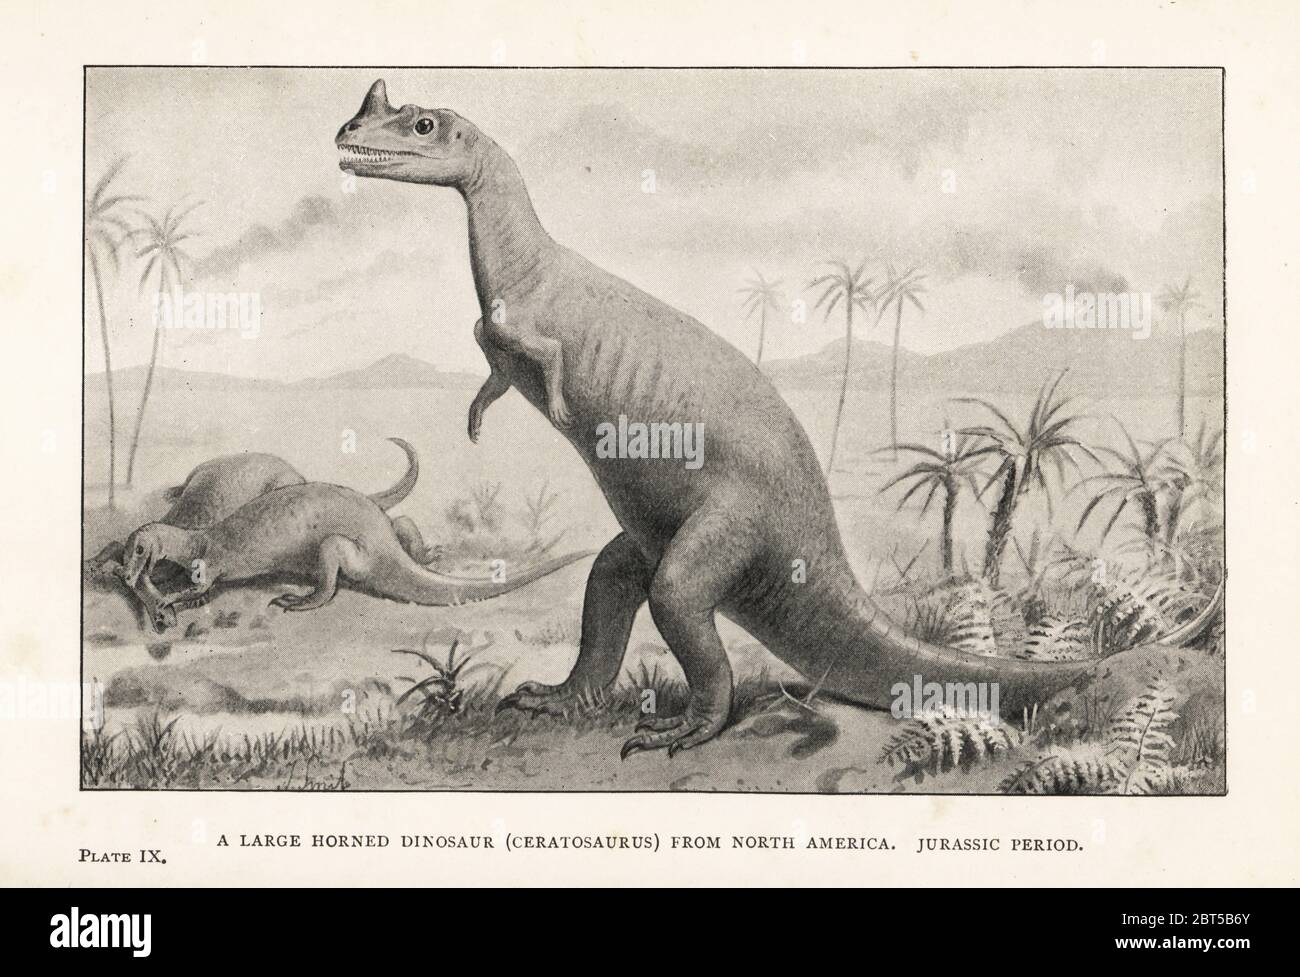 A large horned dinosaur, Ceratosaurus nasicornis, North America, Jurassic Period. Print after an illustration by Joseph Smit from Henry Neville Hutchinsons Creatures of Other Days, Popular Studies in Palaeontology, Chapman and Hall, London, 1896. Stock Photo